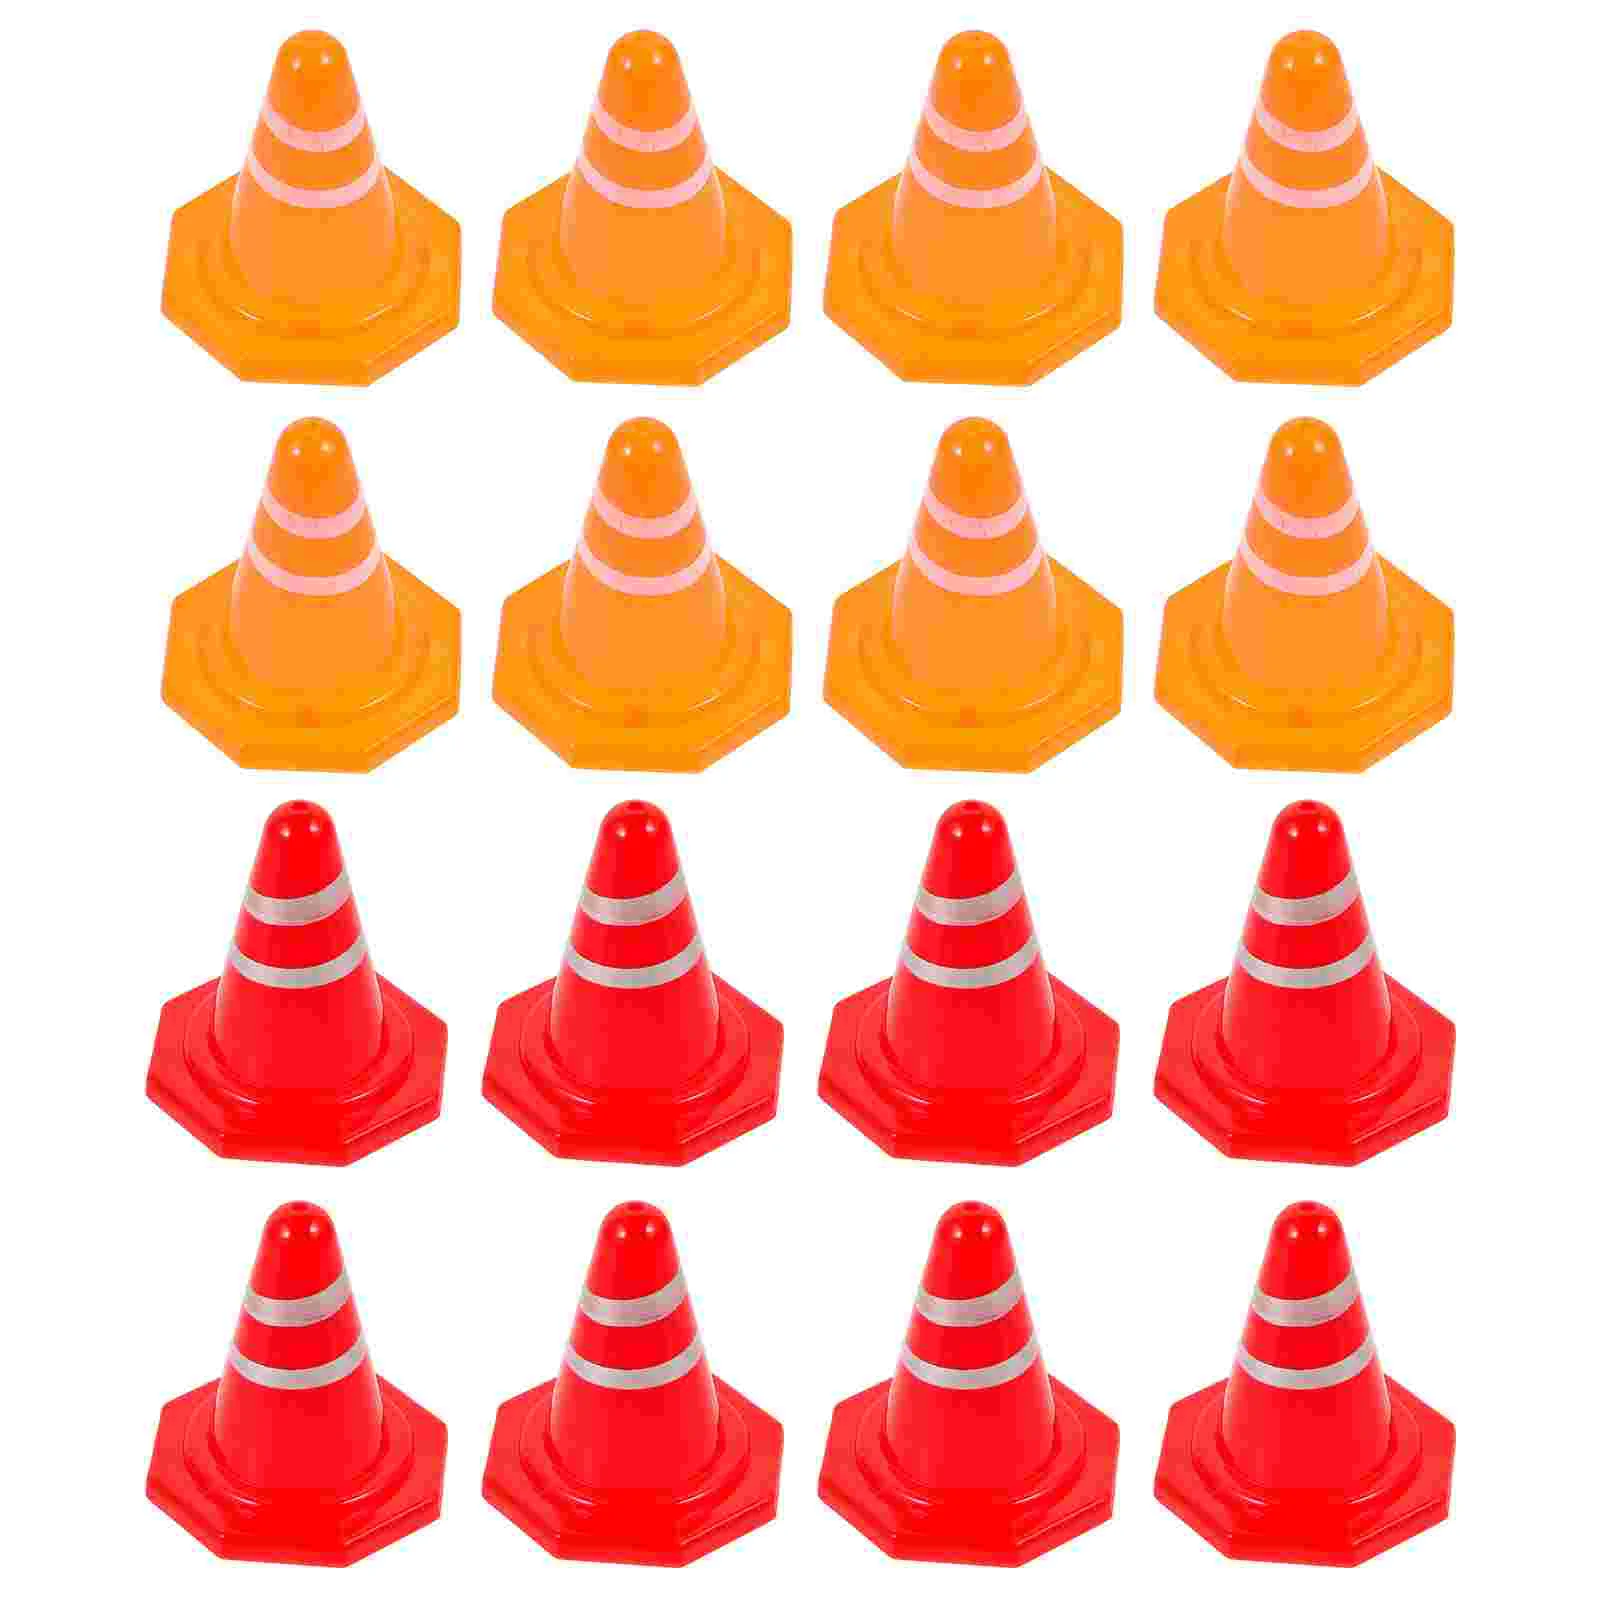 16 Pcs Toy Barricade Childrens Toys Road Signs for Kids Ice Cream Cones Counting Traffic Plastic Small